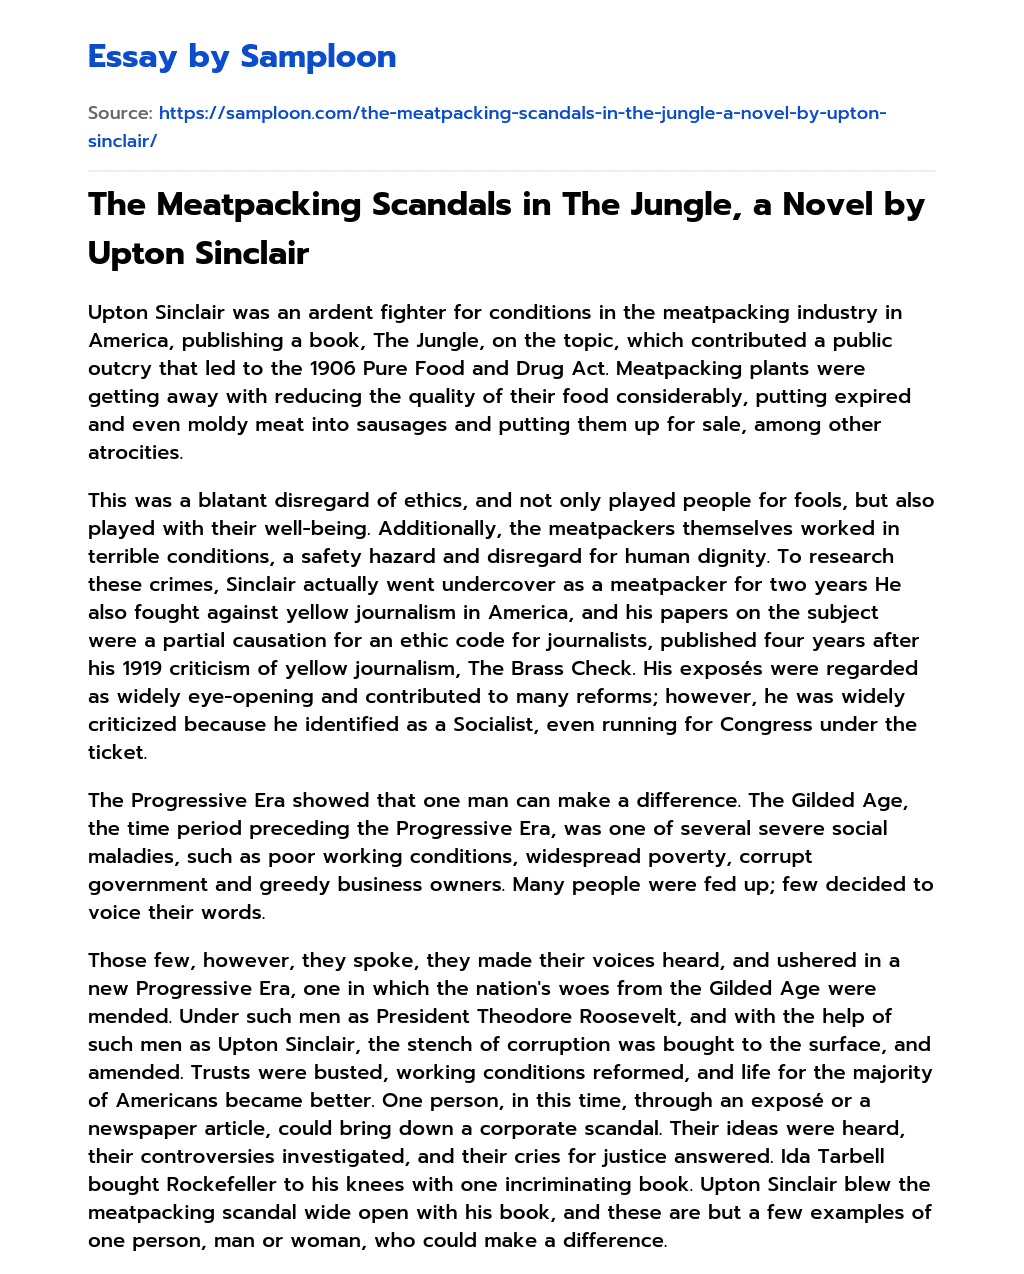 The Meatpacking Scandals in The Jungle, a Novel by Upton Sinclair essay